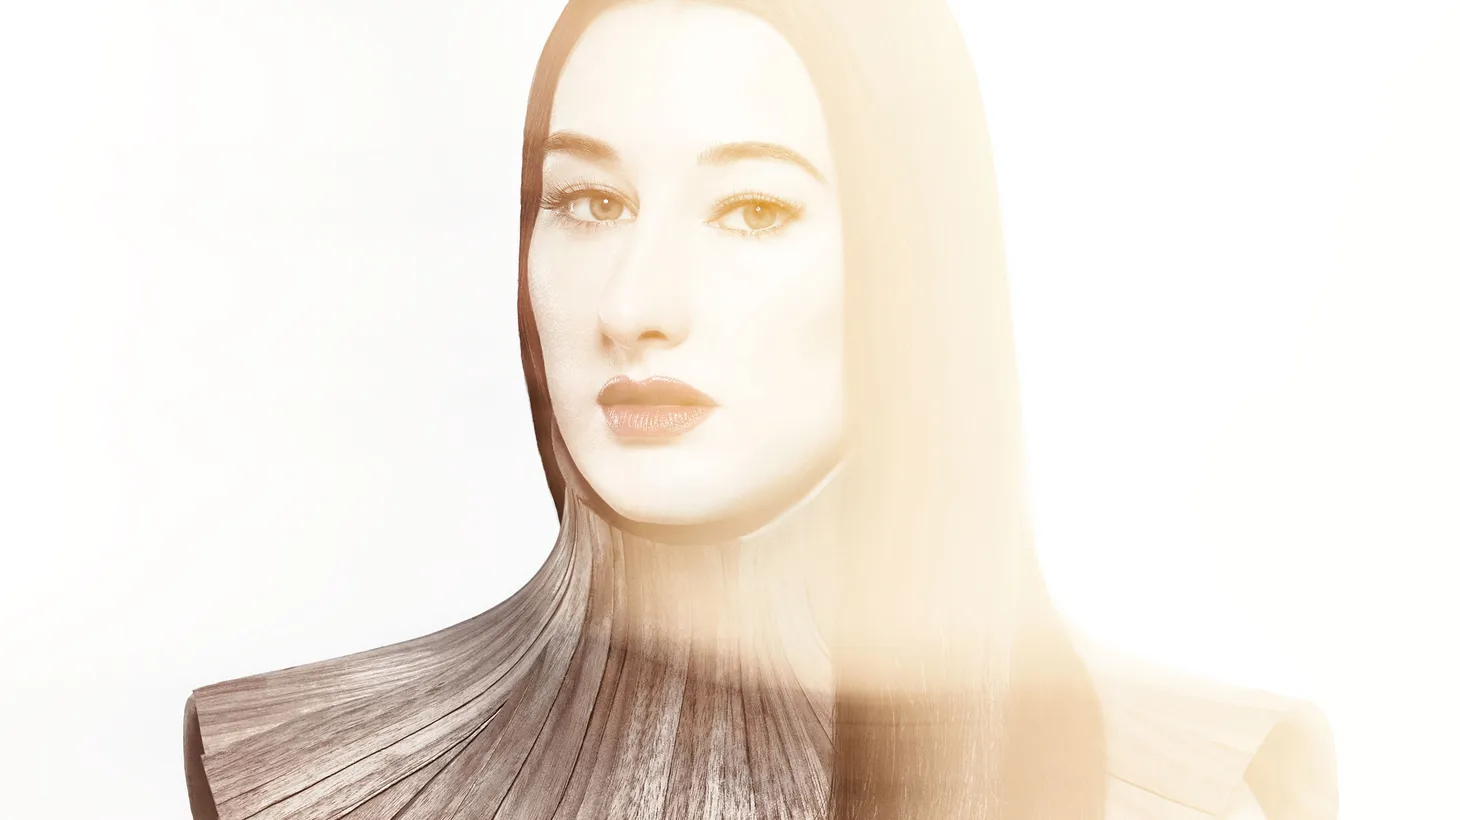 A dark princess of sound Zola Jesus has an unmistakable presence and a powerful voice that drives a series of electro-pop gems on her new album. The LA artist graces us with a live performance on Morning Becomes Eclectic.